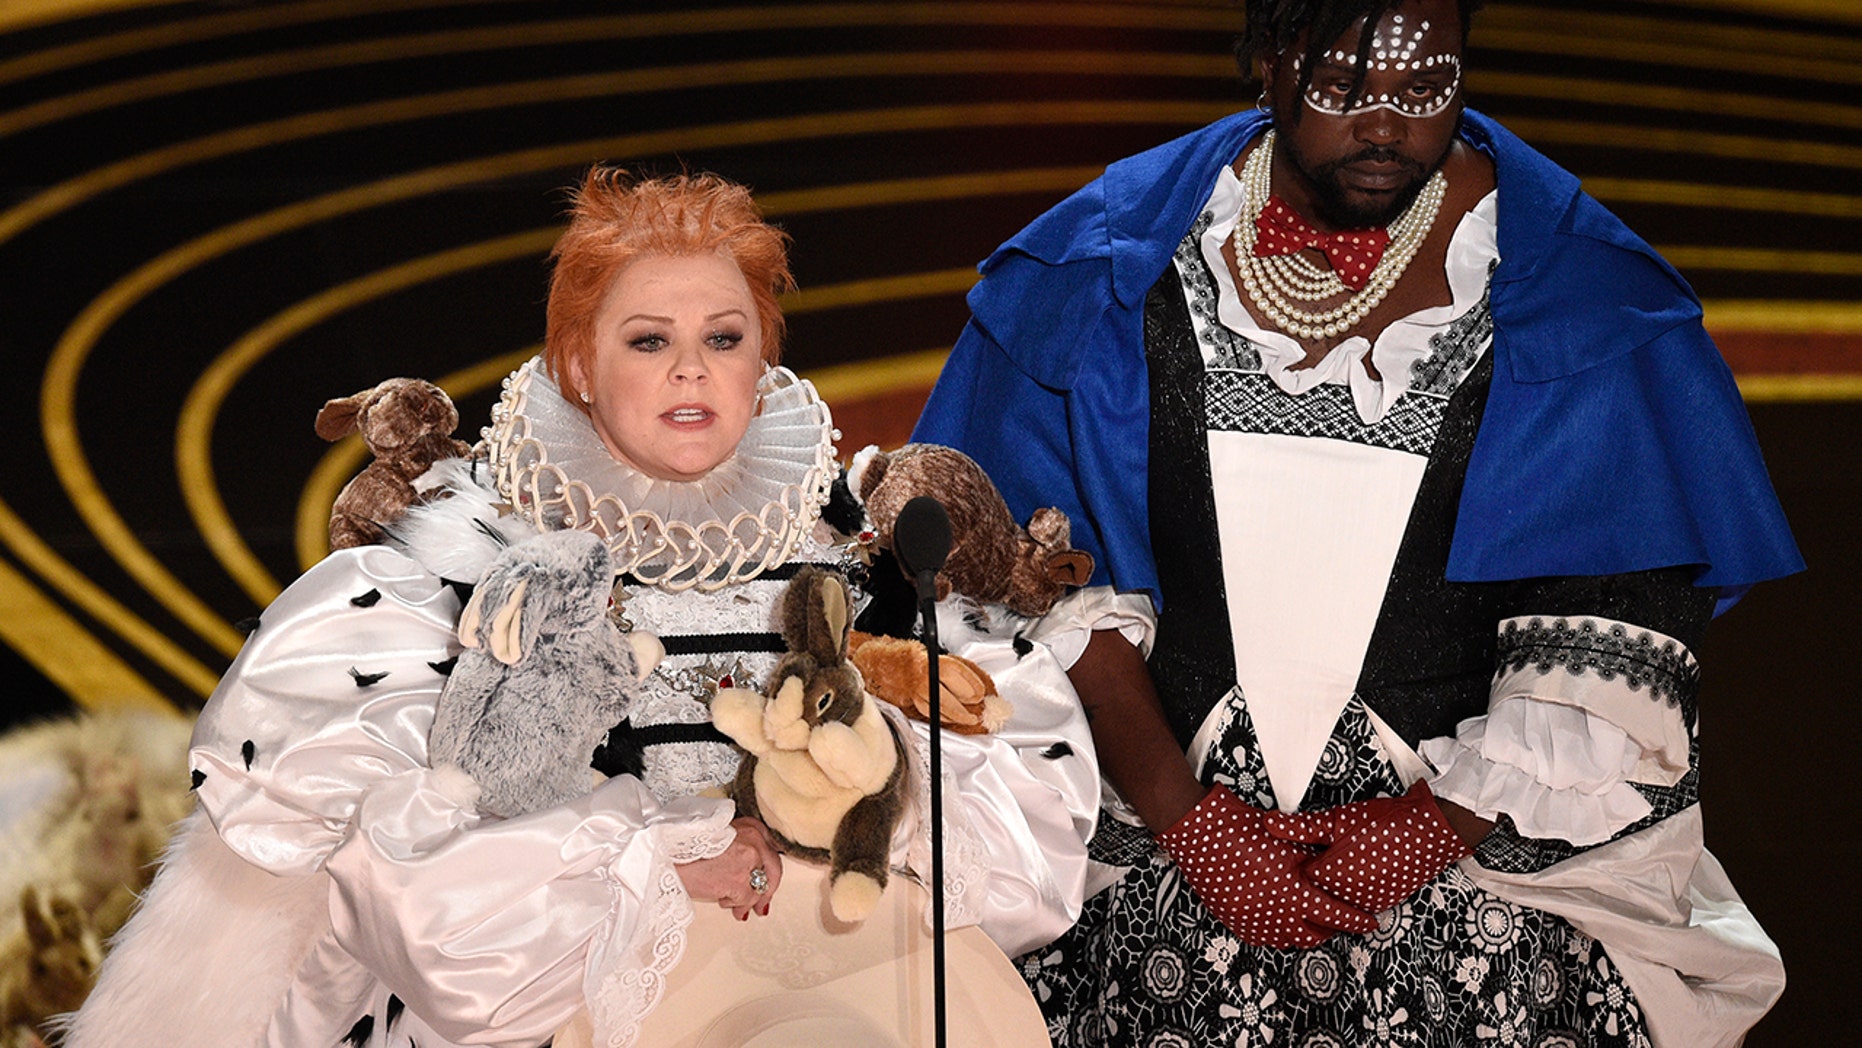 Top: Oscars presenter Melissa McCarthy spoofs 'The Favourite' with bunny-covered ...